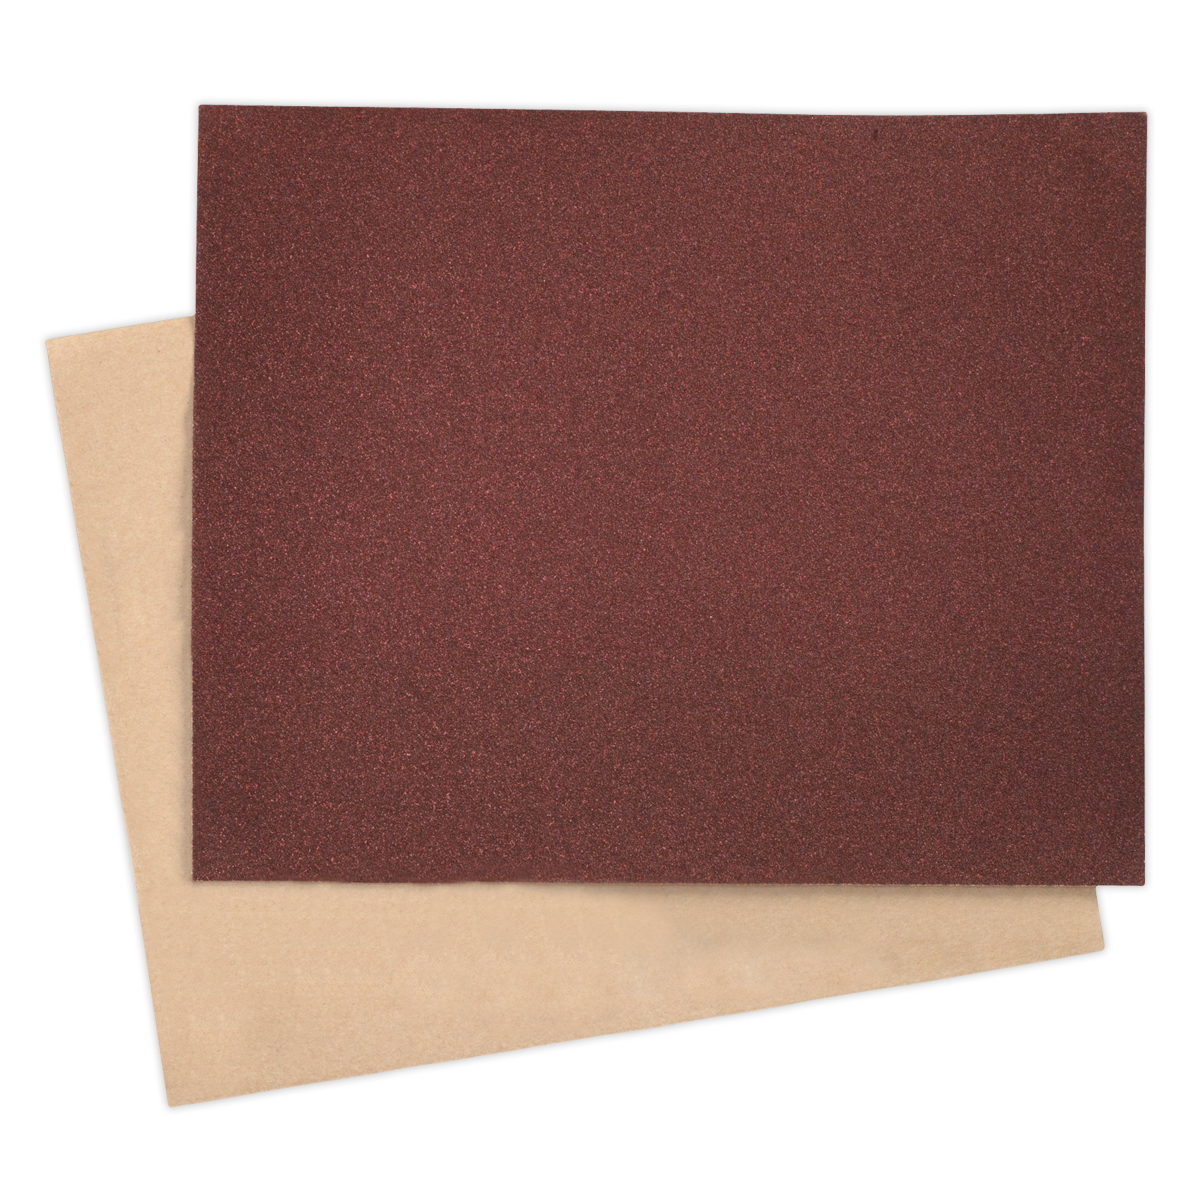 Production Paper 230 x 280mm 60Grit Pack of 25 - PP232860 - Farming Parts